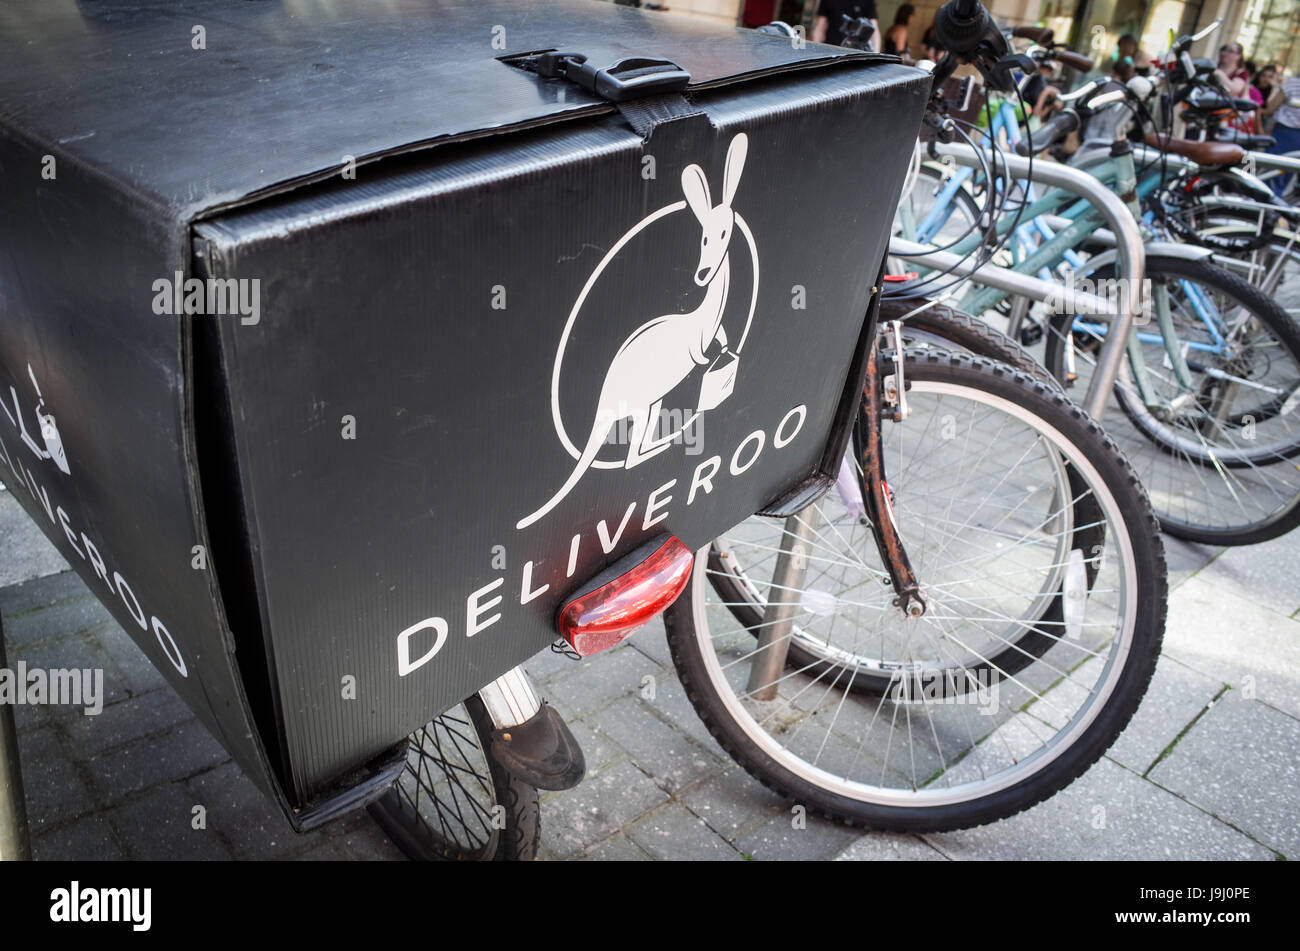 A Deliveroo box on the rear of a food delivery courier bike in London UK. Fast Food delivery buy bike courier is a fast growing part of the UK economy. Stock Photo